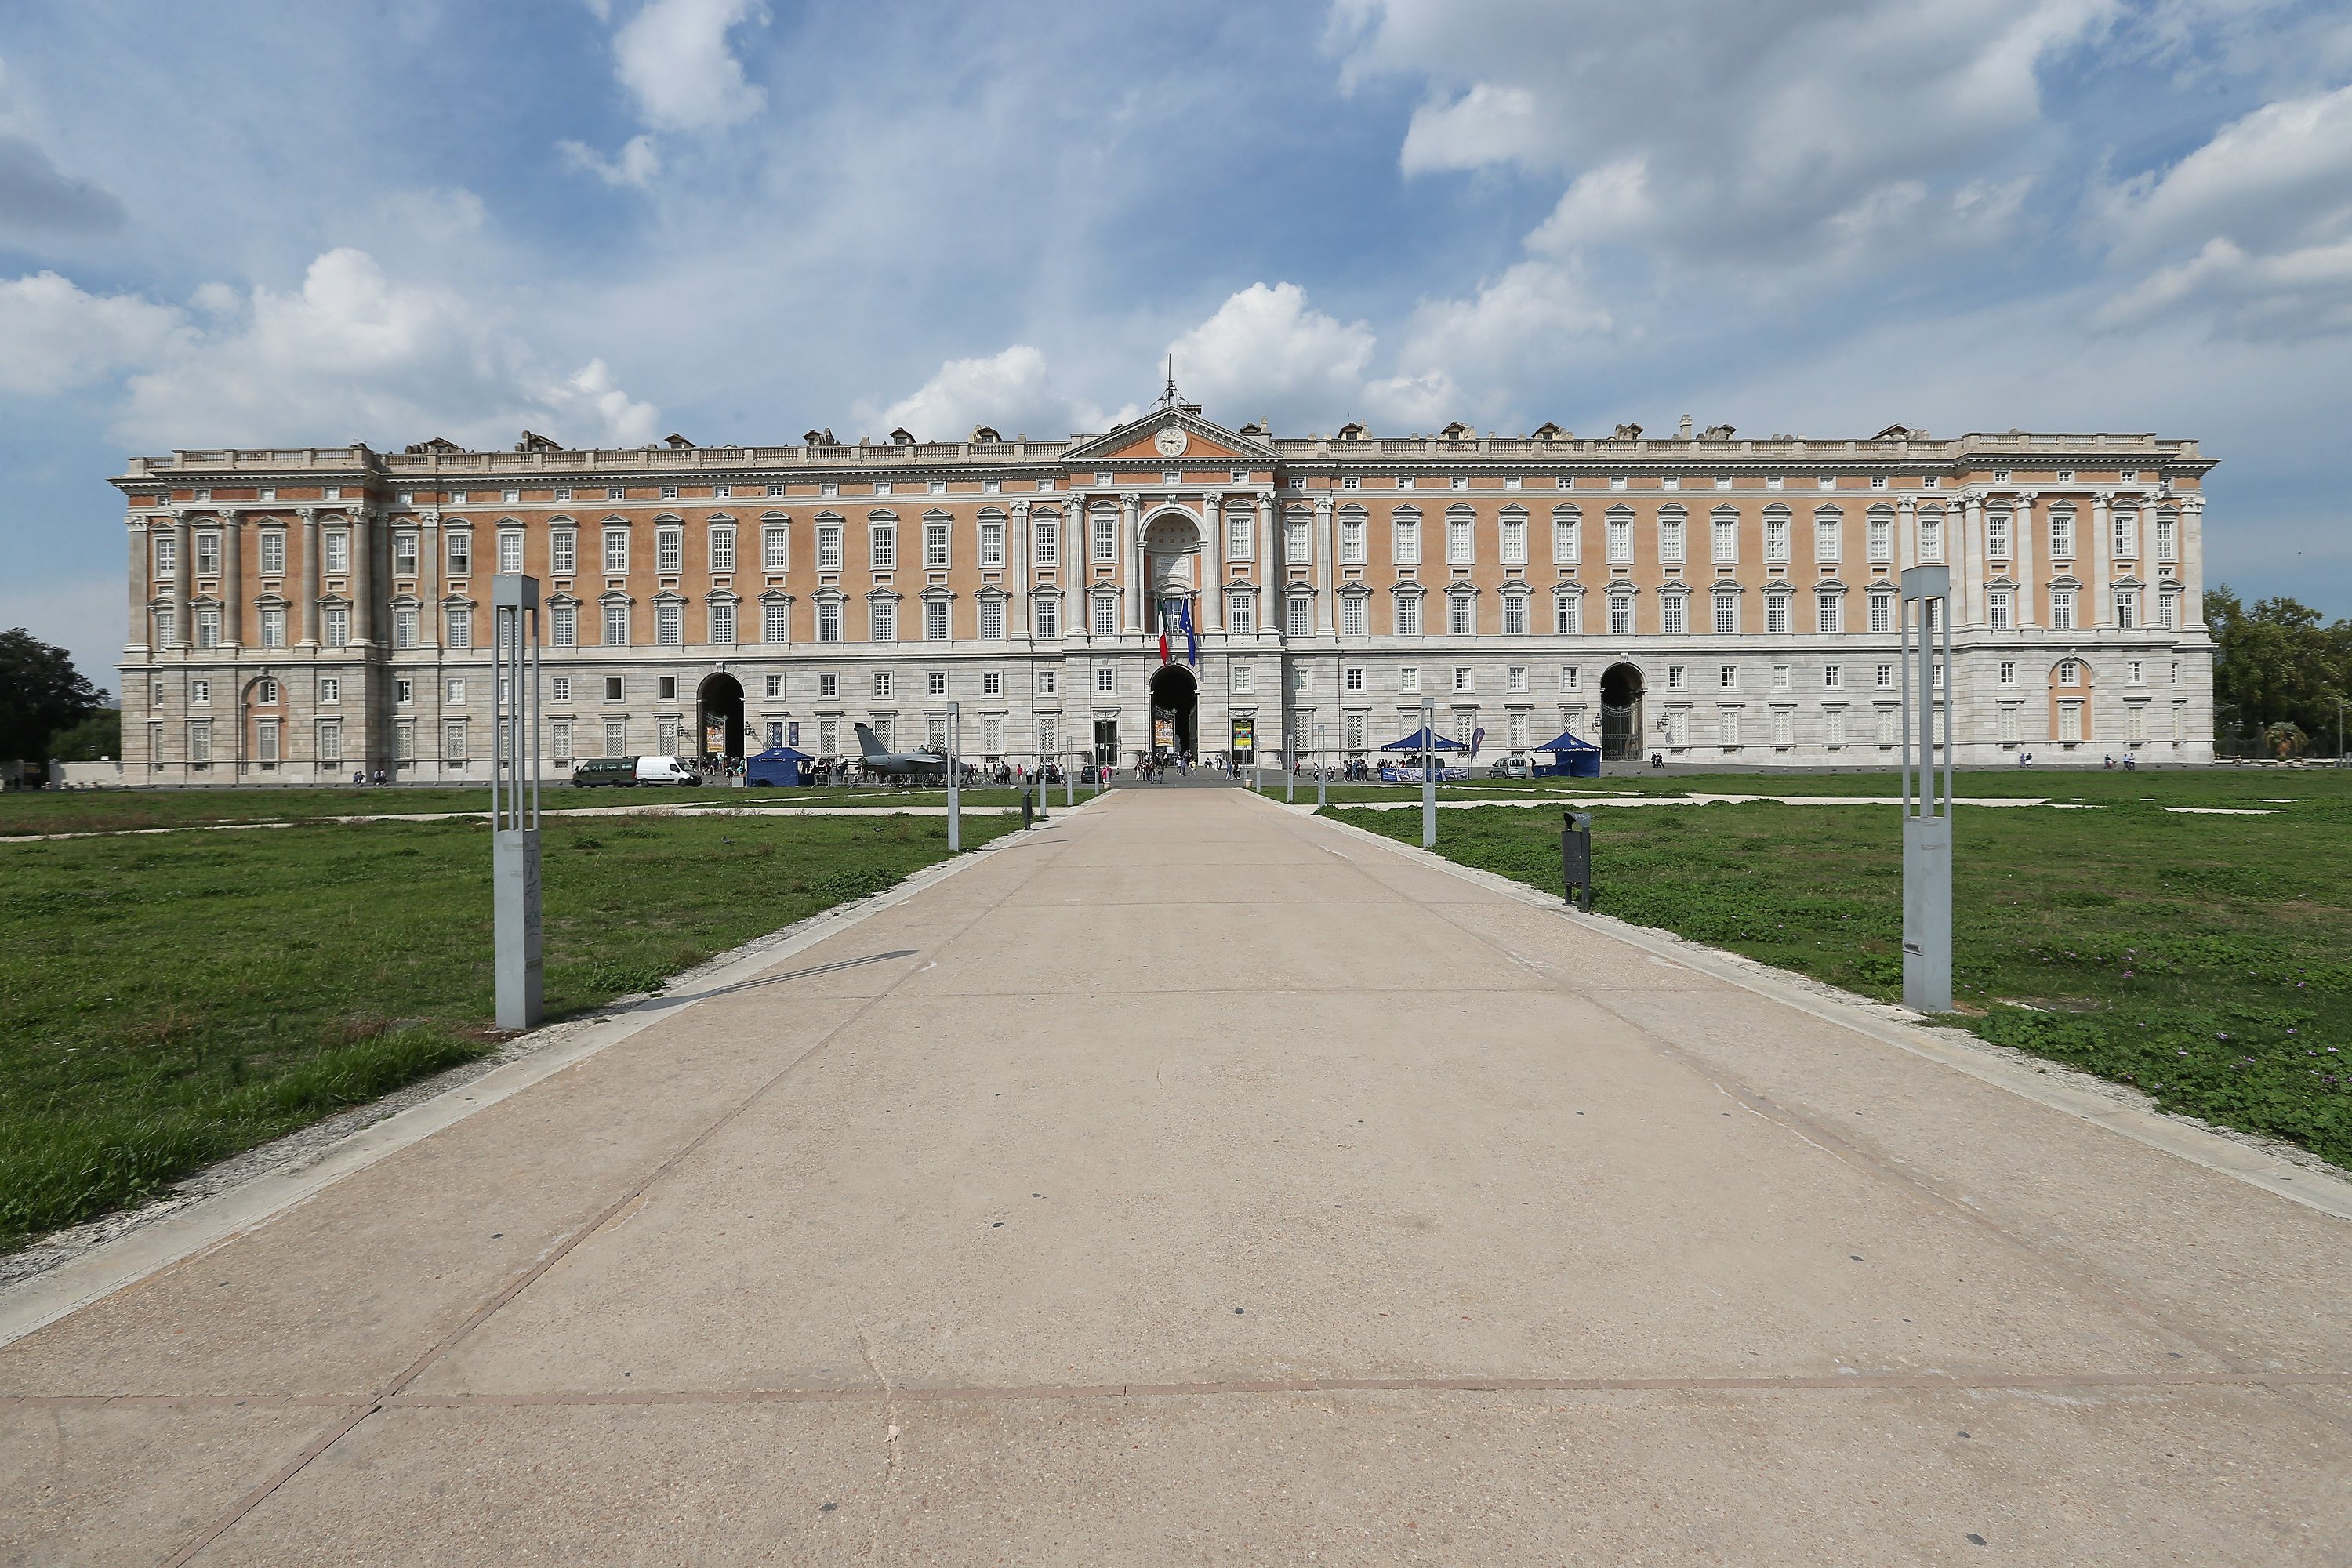 A external view of the Royal Palace of Caserta. Built by the